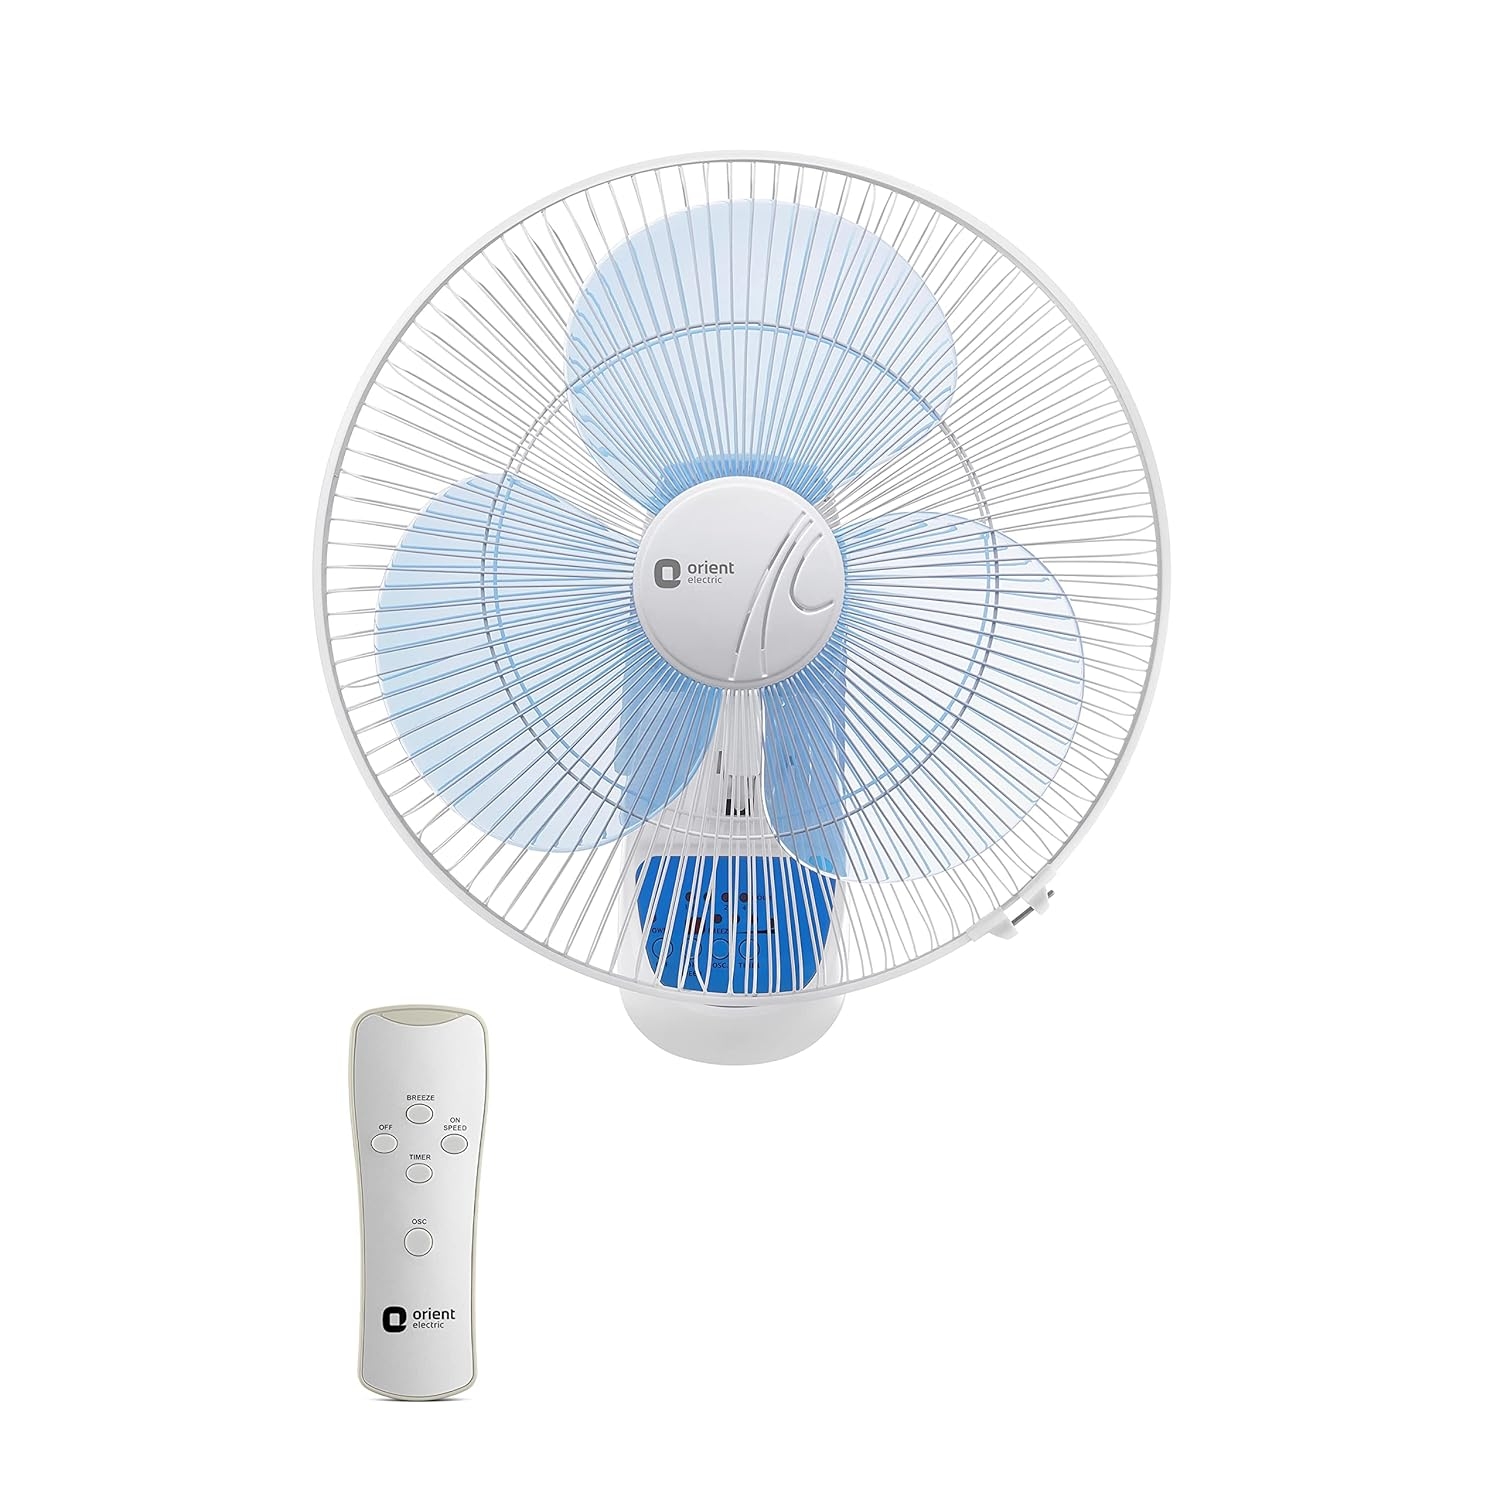 Orient Electric Wall-49 Wall Mounted Fan | Remote, Automatic Speed Touch Control Panel - 2 Years Warranty